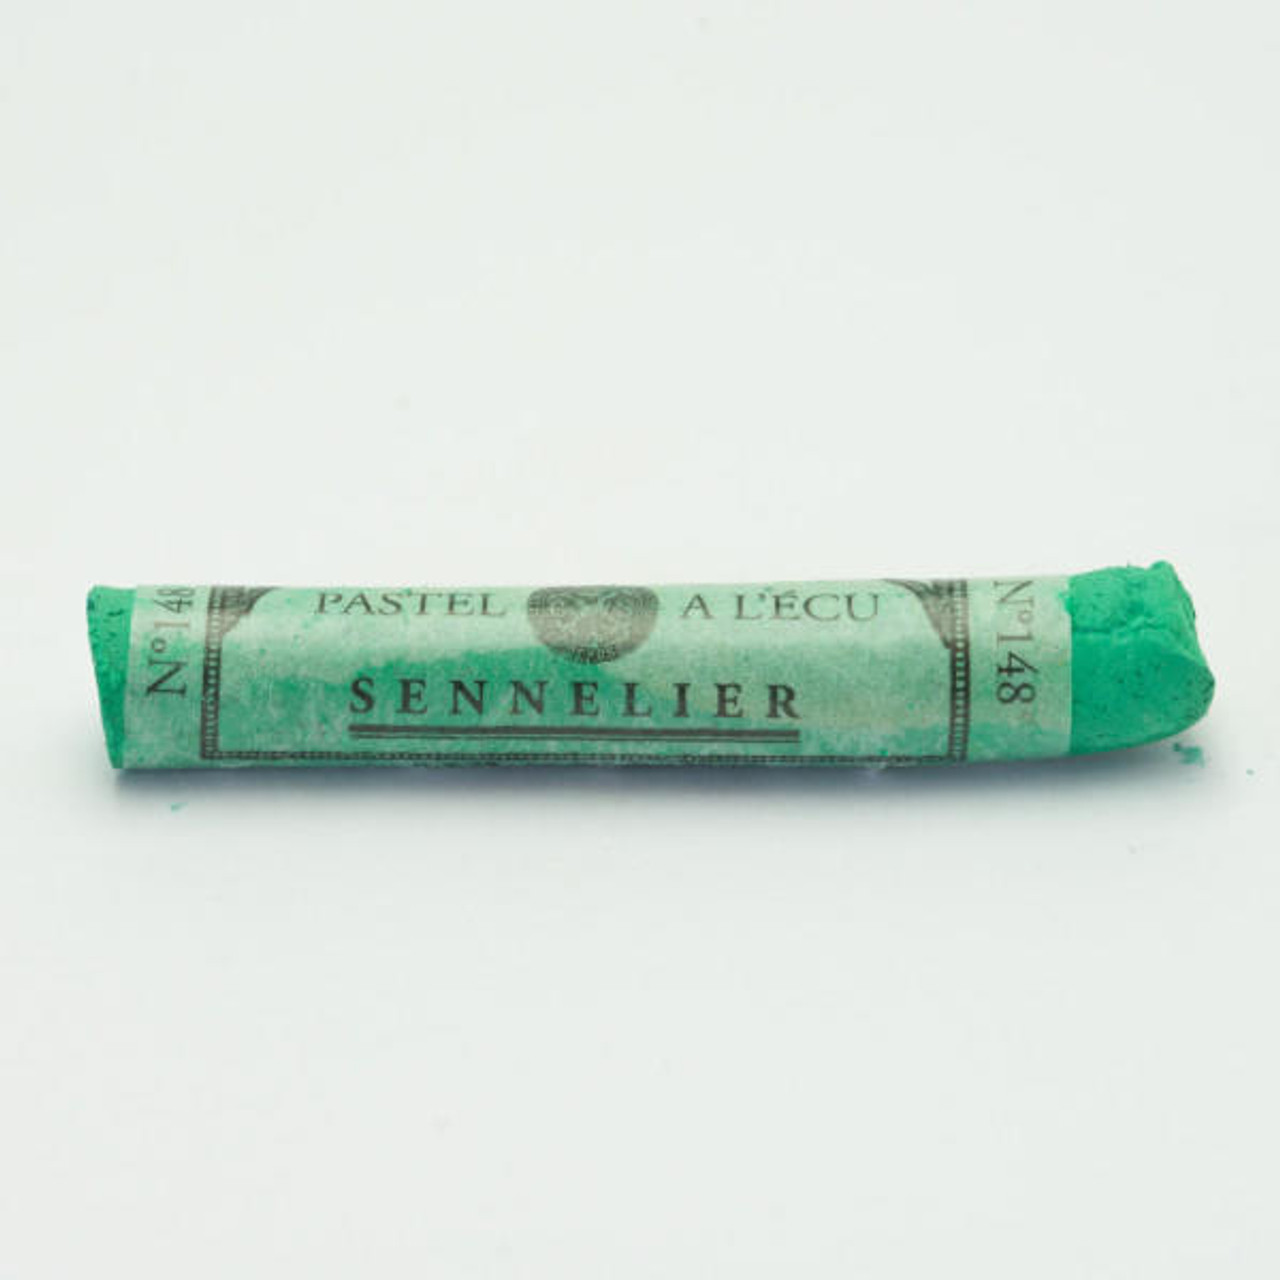 Sennelier Extra Soft Pastel - 150 Lawn Green